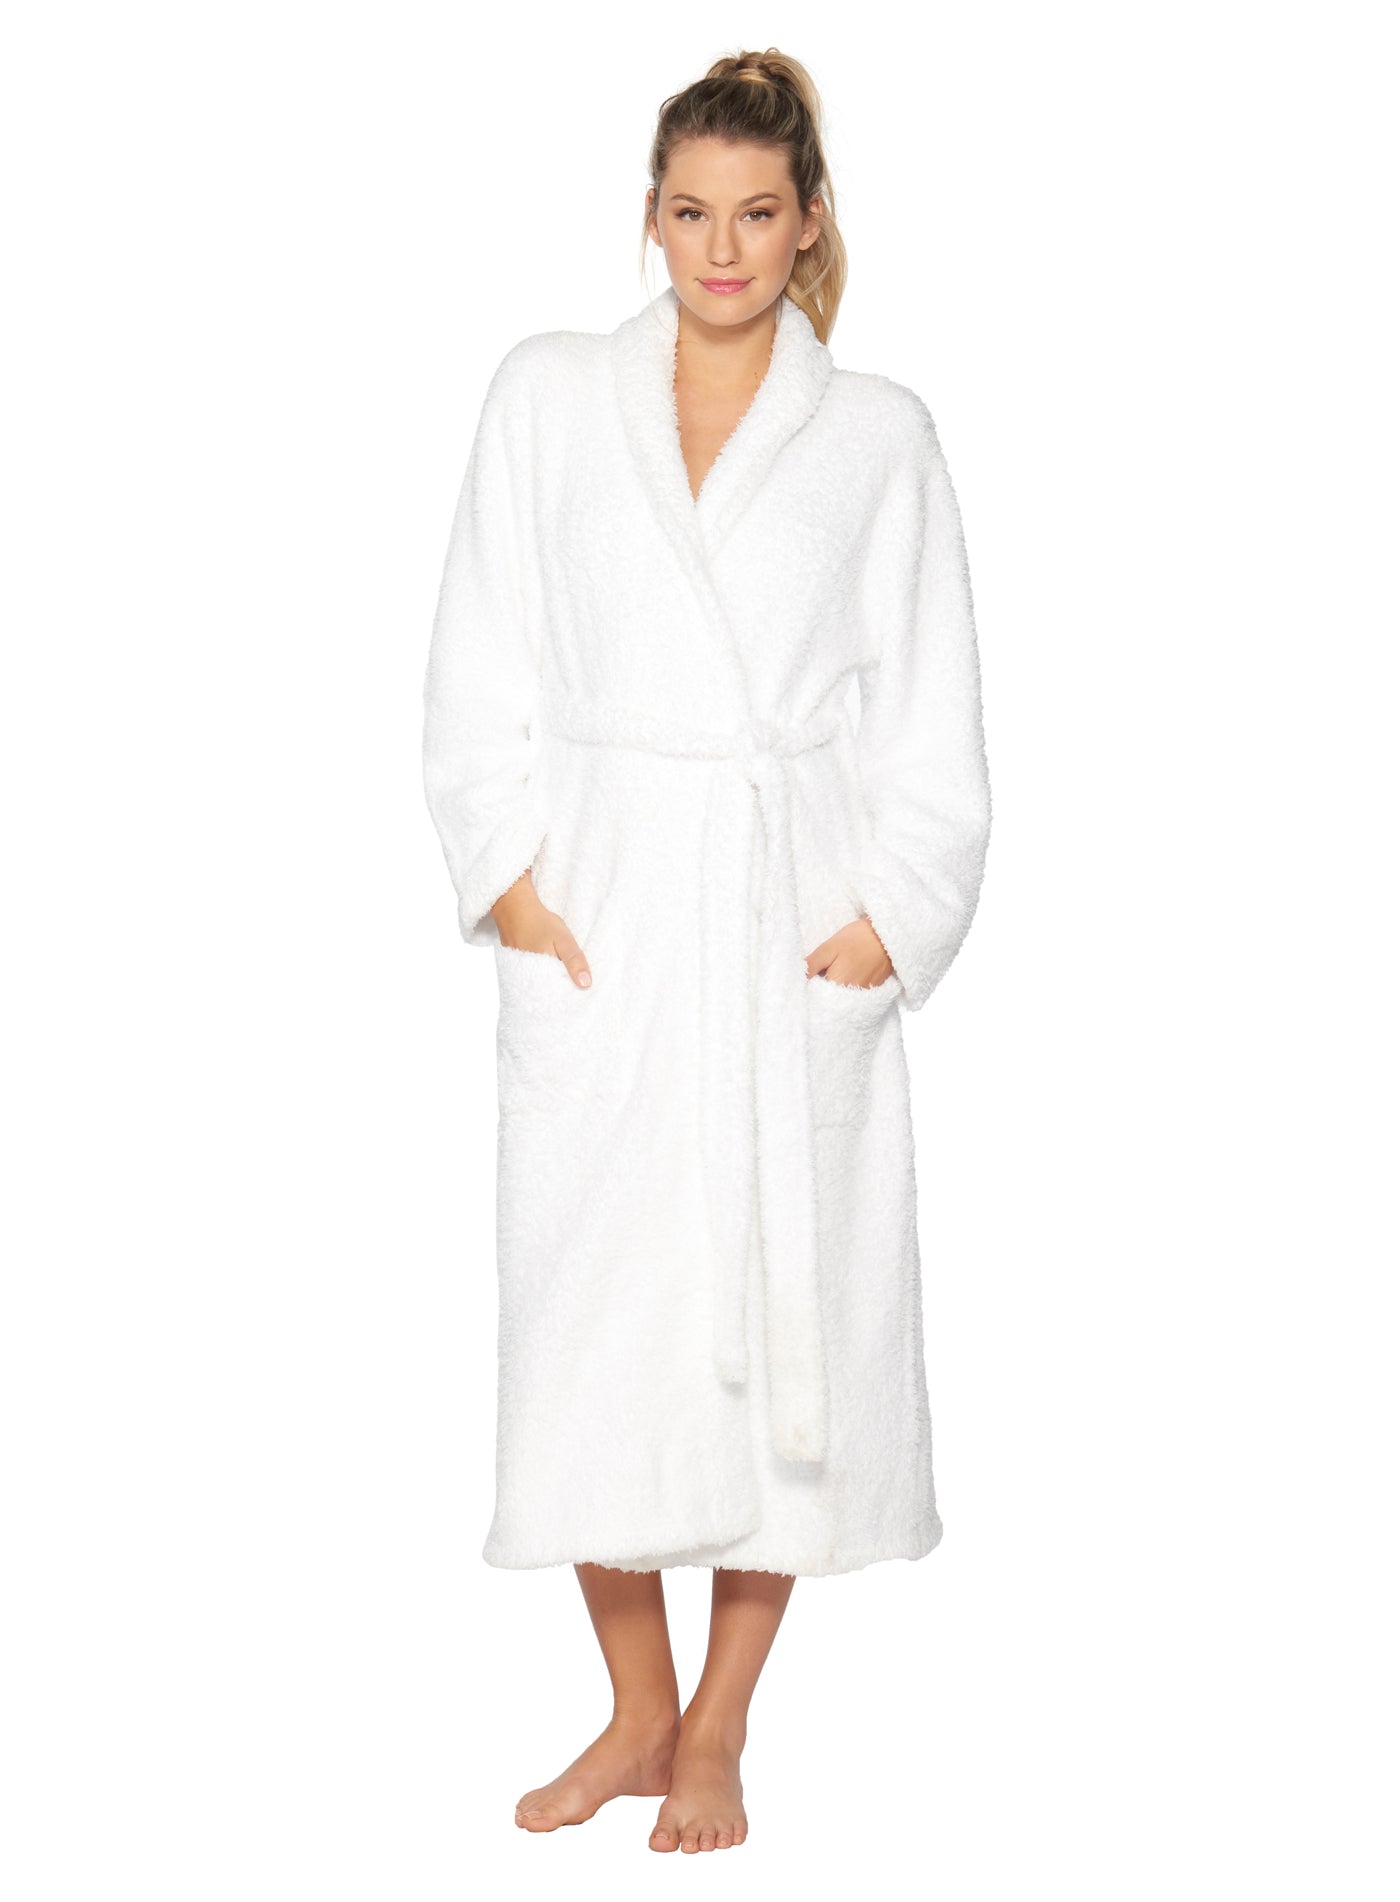 Barefoot Dreams Cozychic Adult Robe